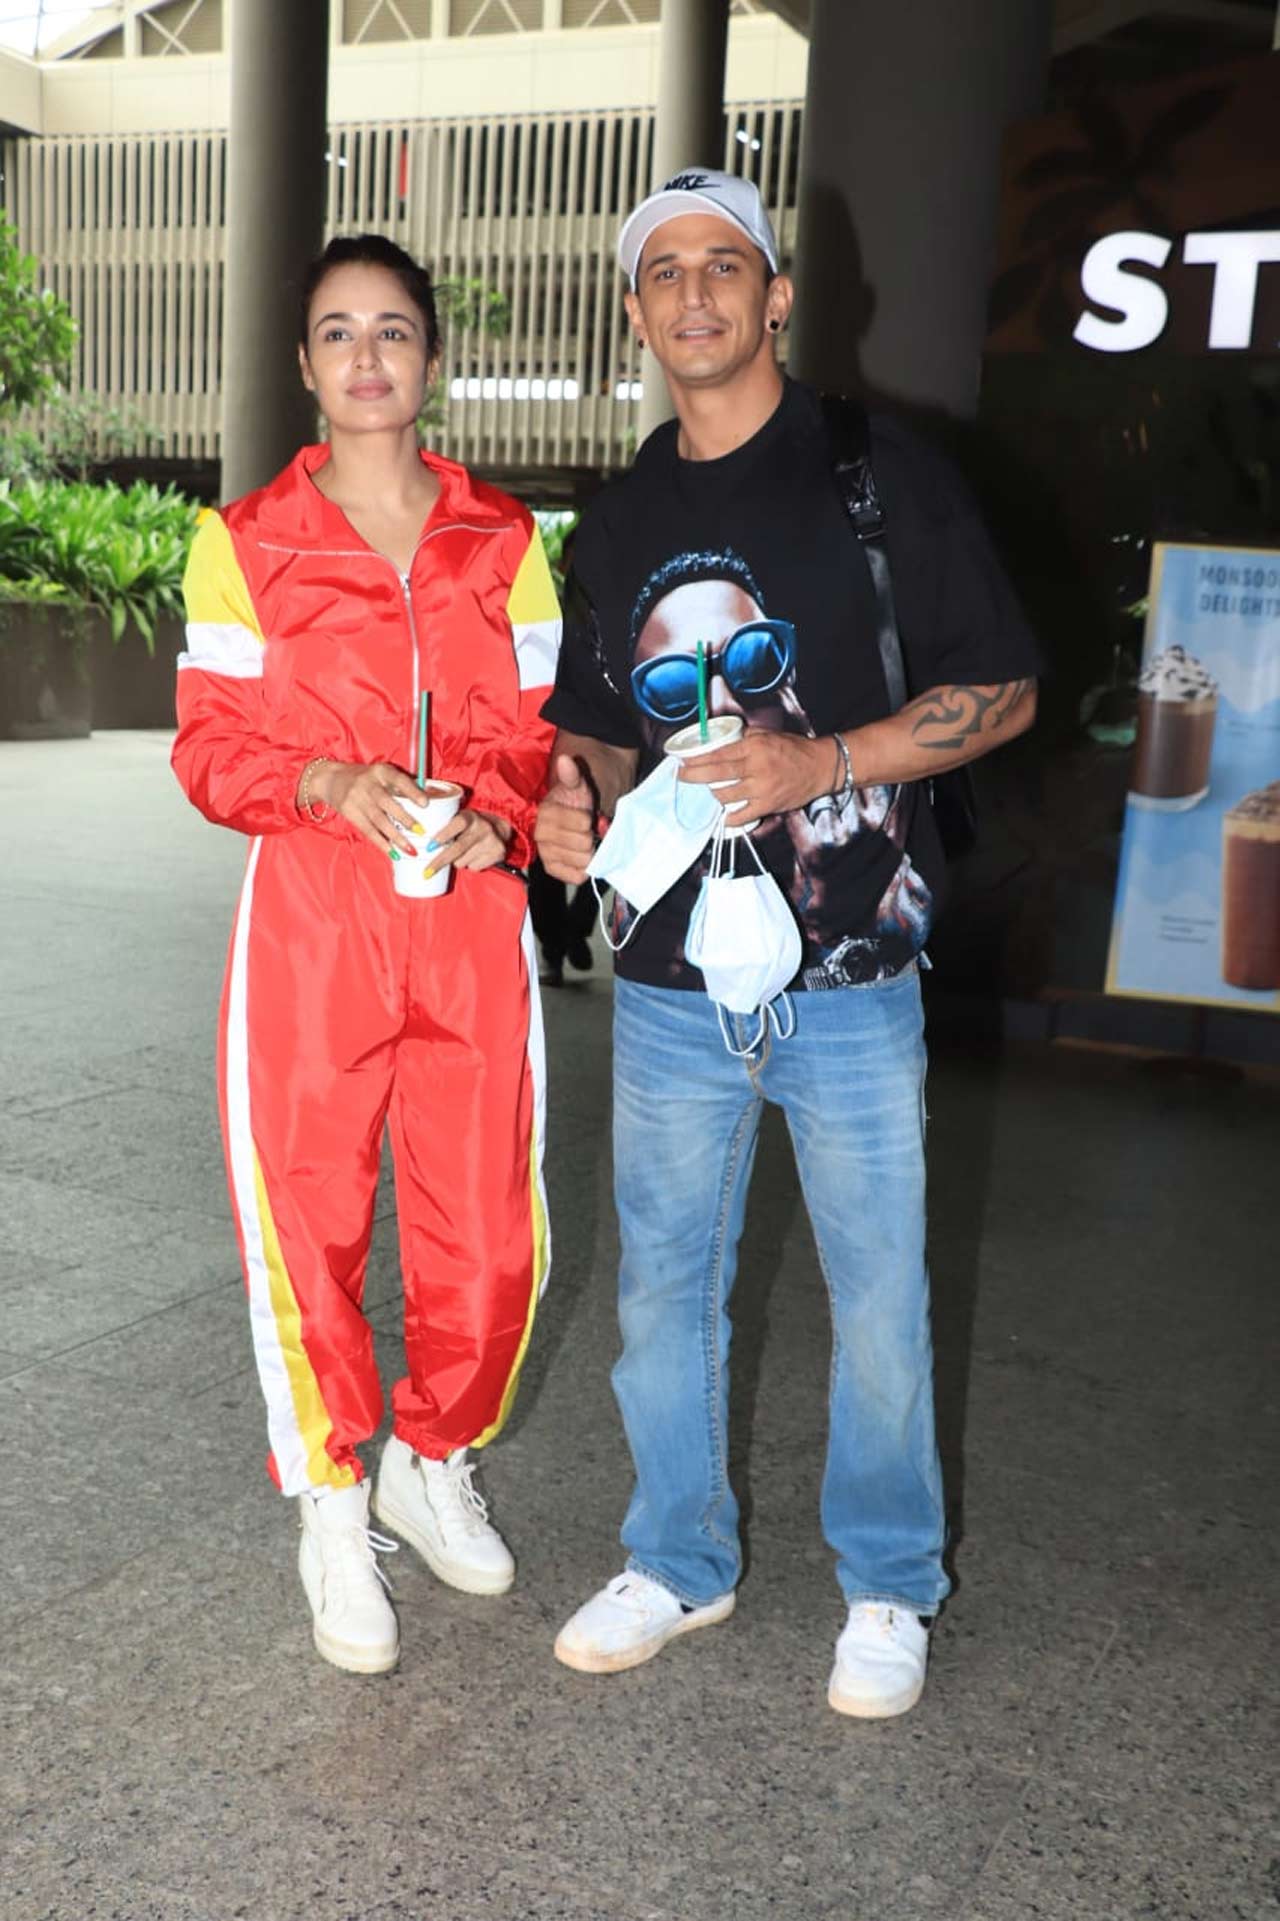 Yuvika Chaudhary and Prince Narula posed for the shutterbugs when snapped at the Mumbai airport. The actress opted for a red coloured tracksuit, and Prince was seen wearing a basic black tee paired with denim.